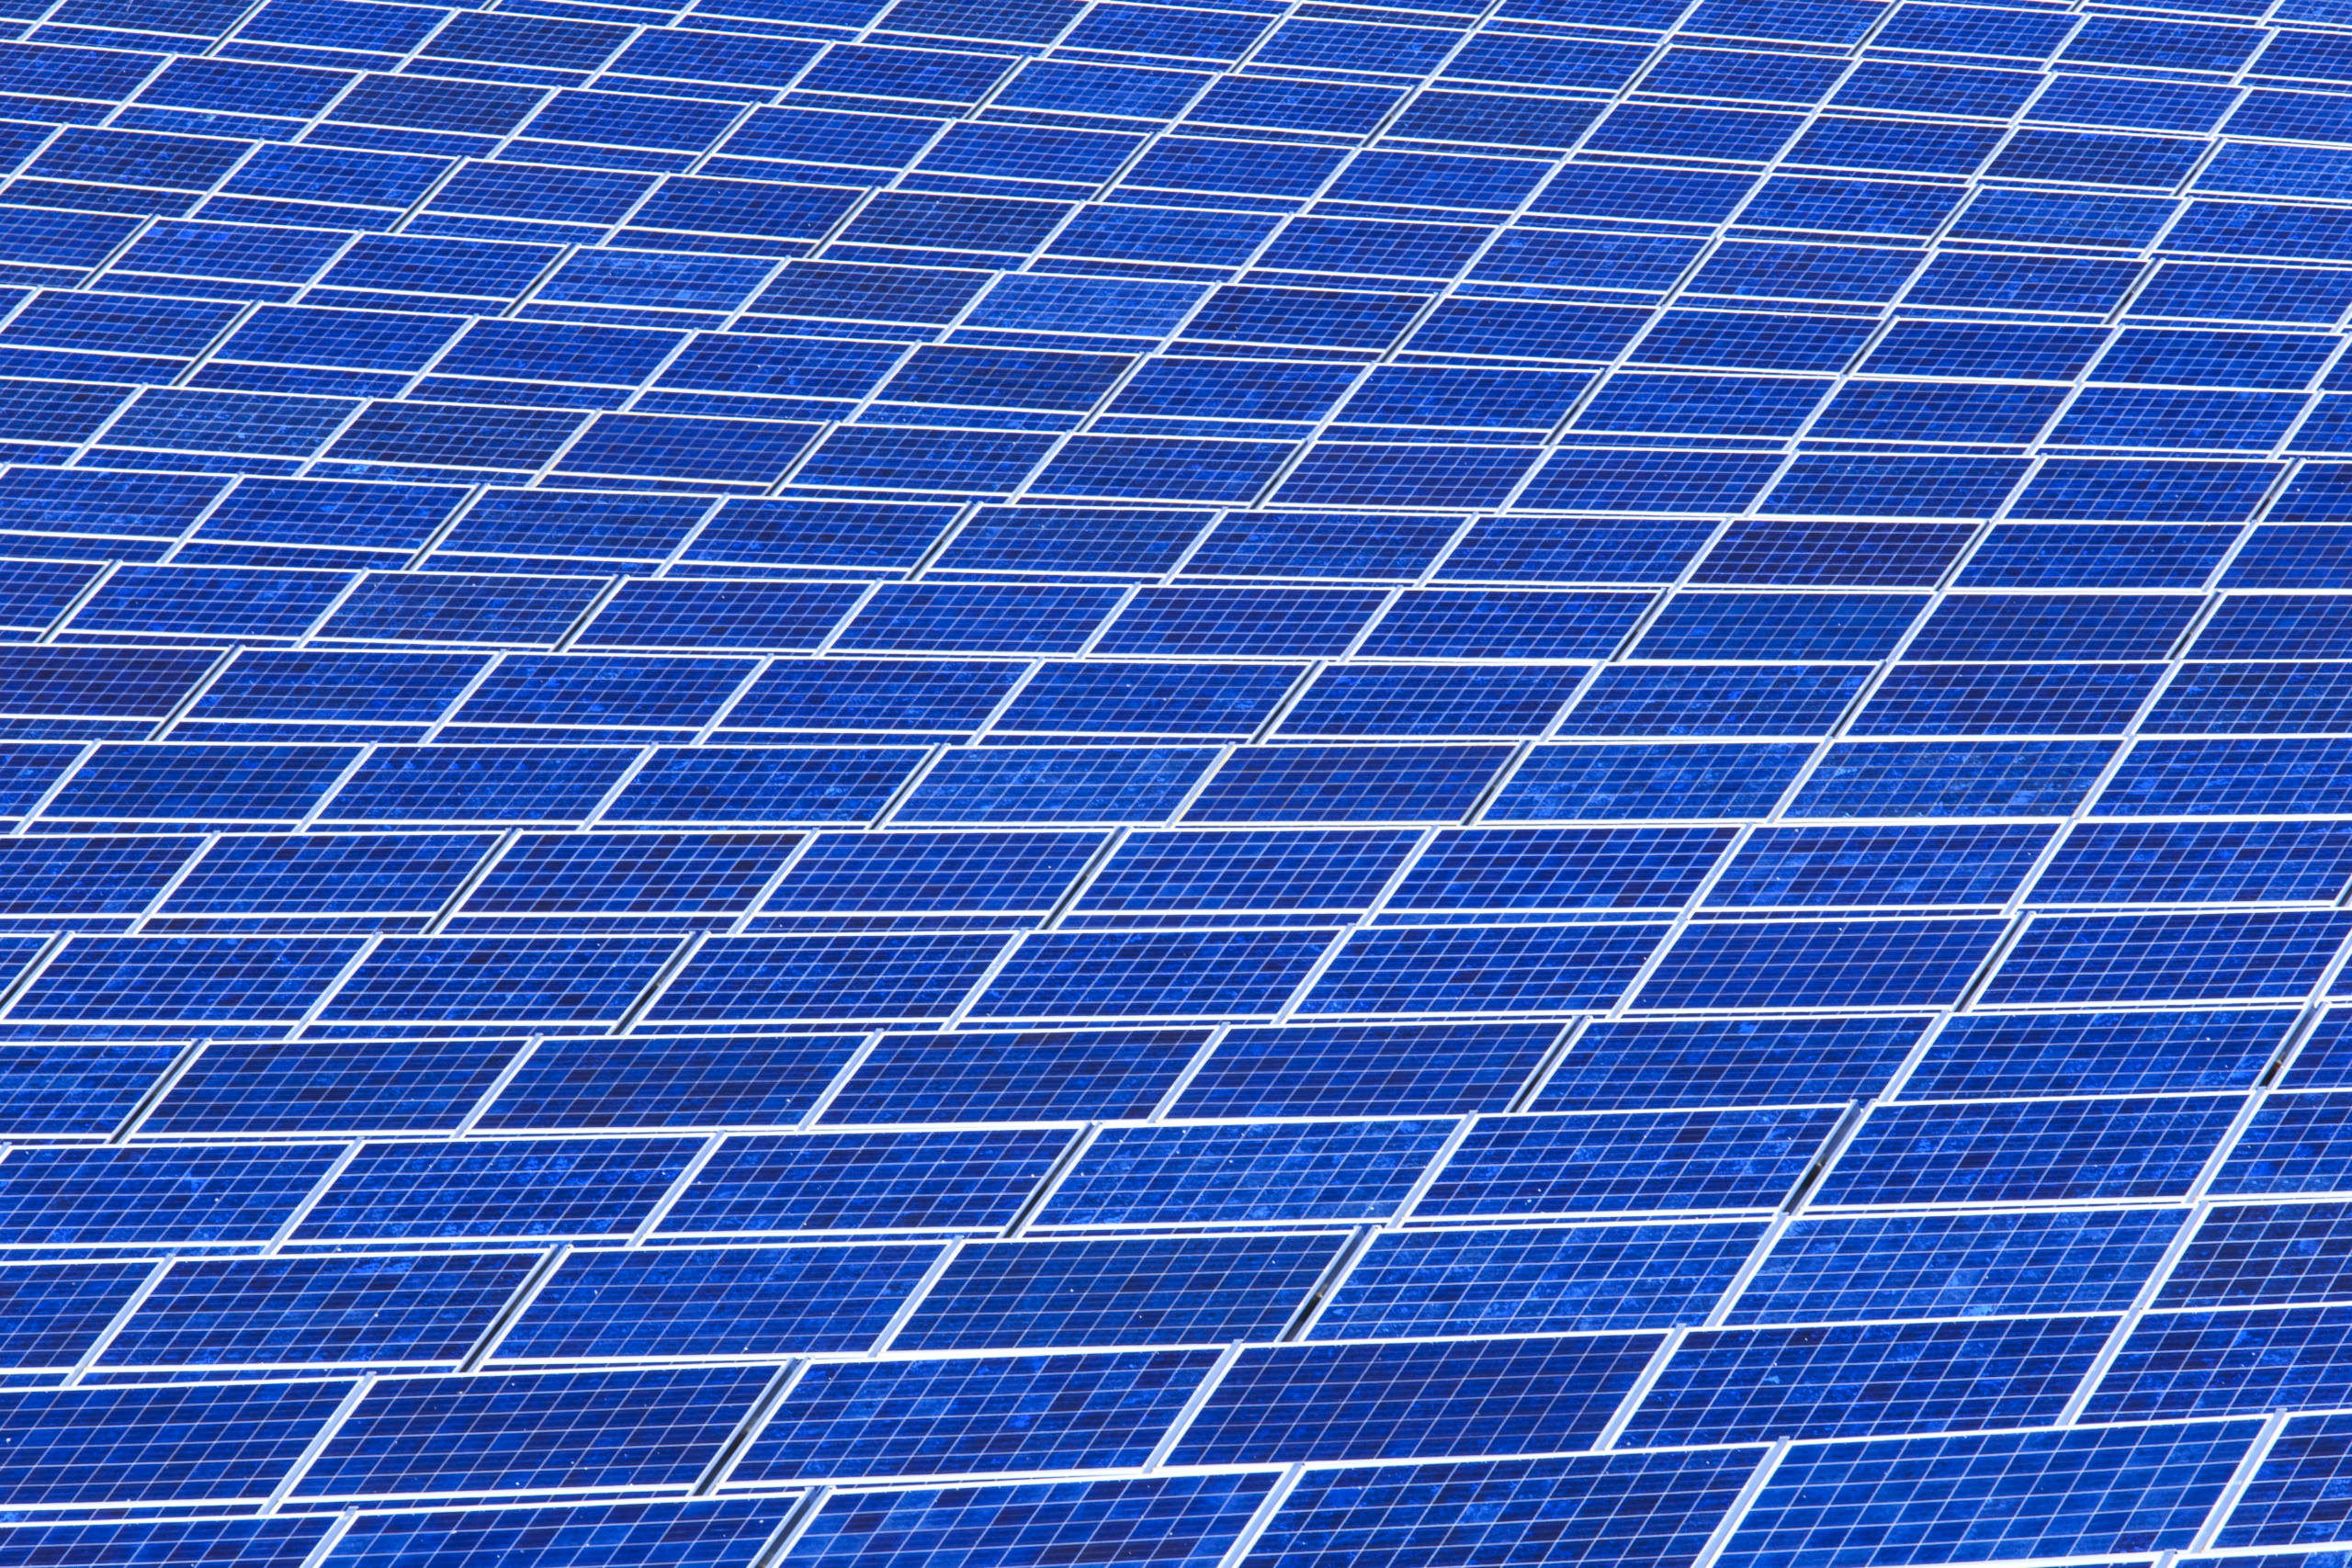 Reducing Energy Poverty in Italy Through Solar PV Market